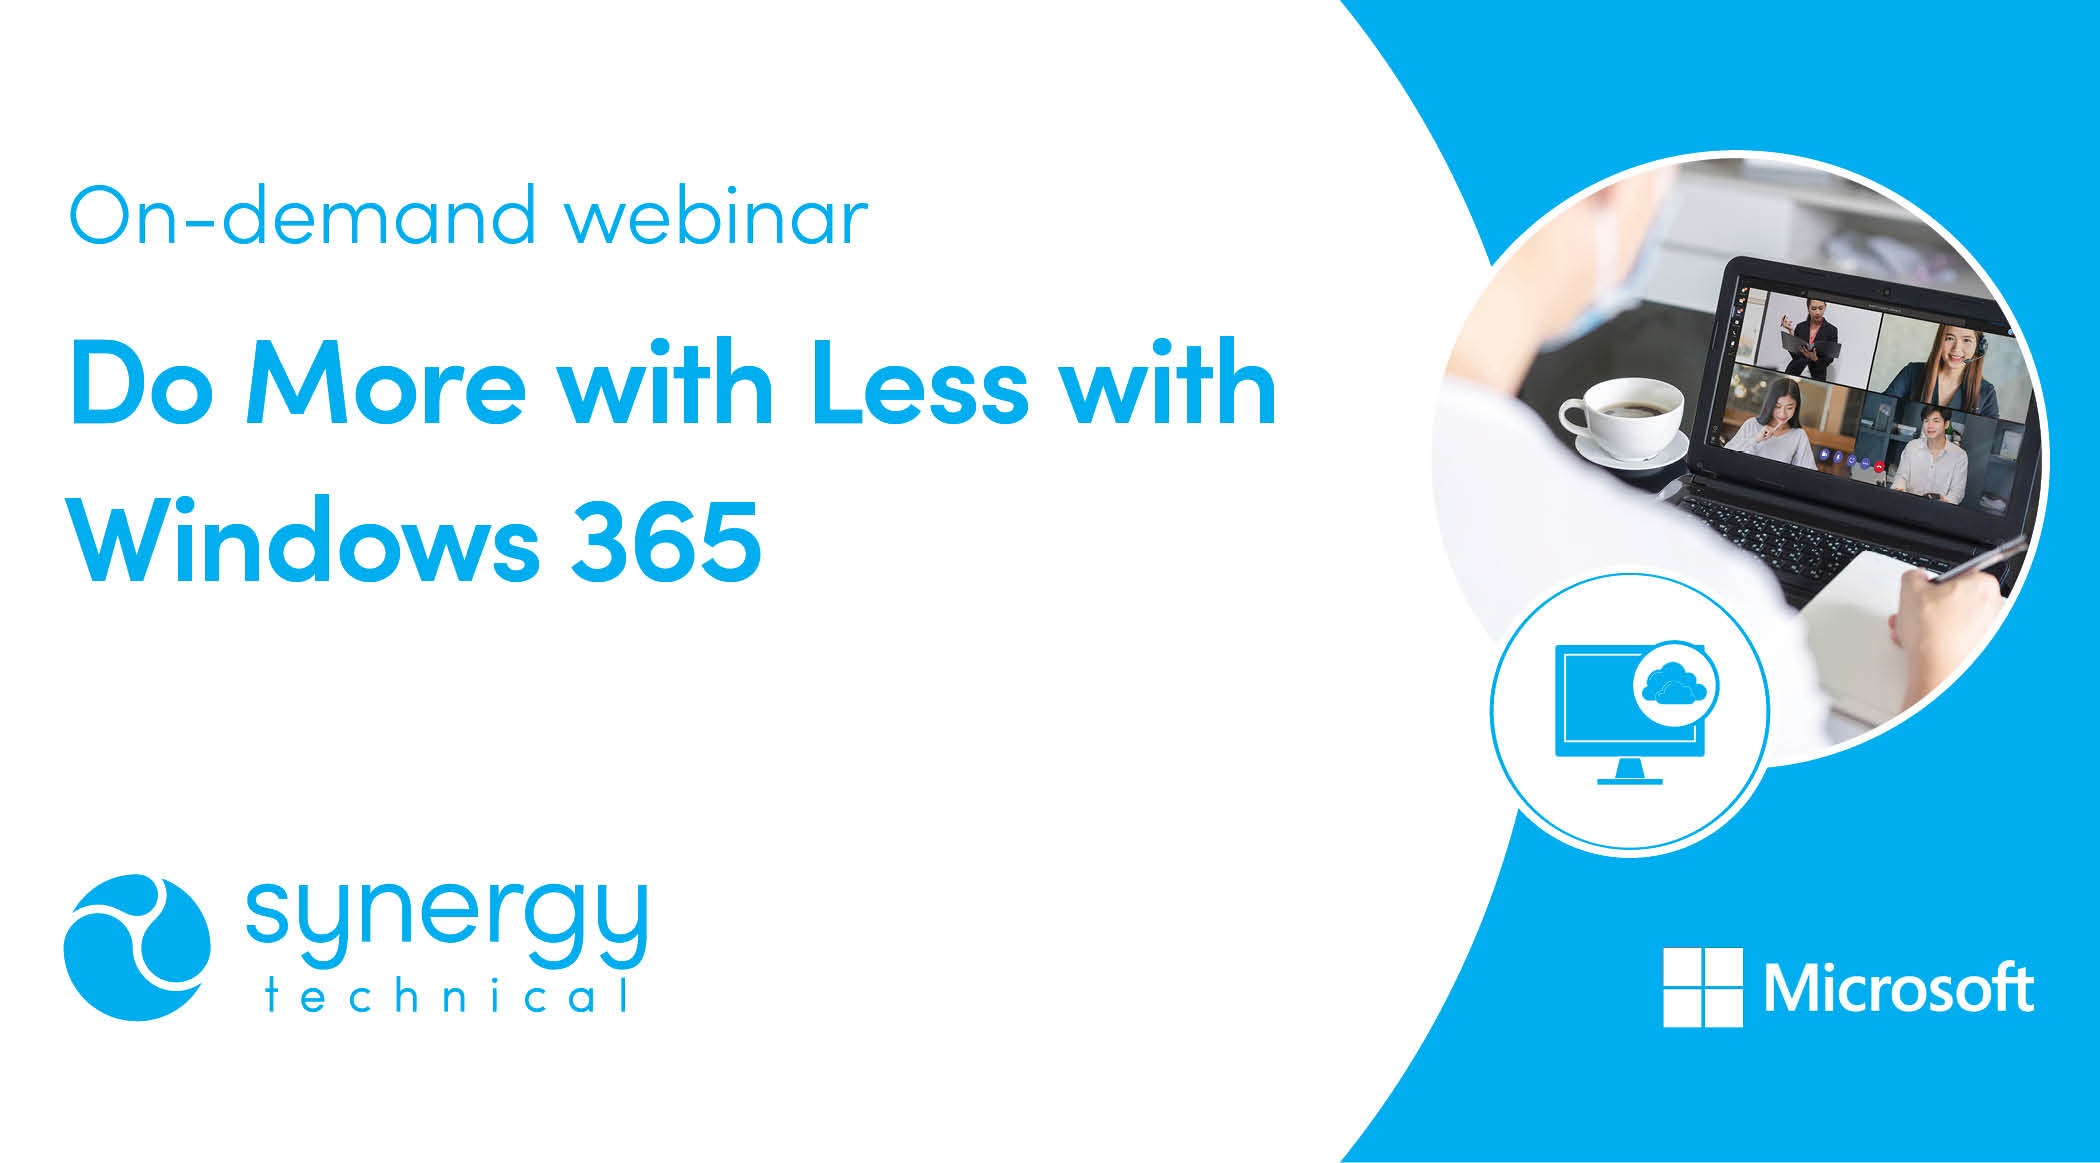 Do More with Less with Windows 365